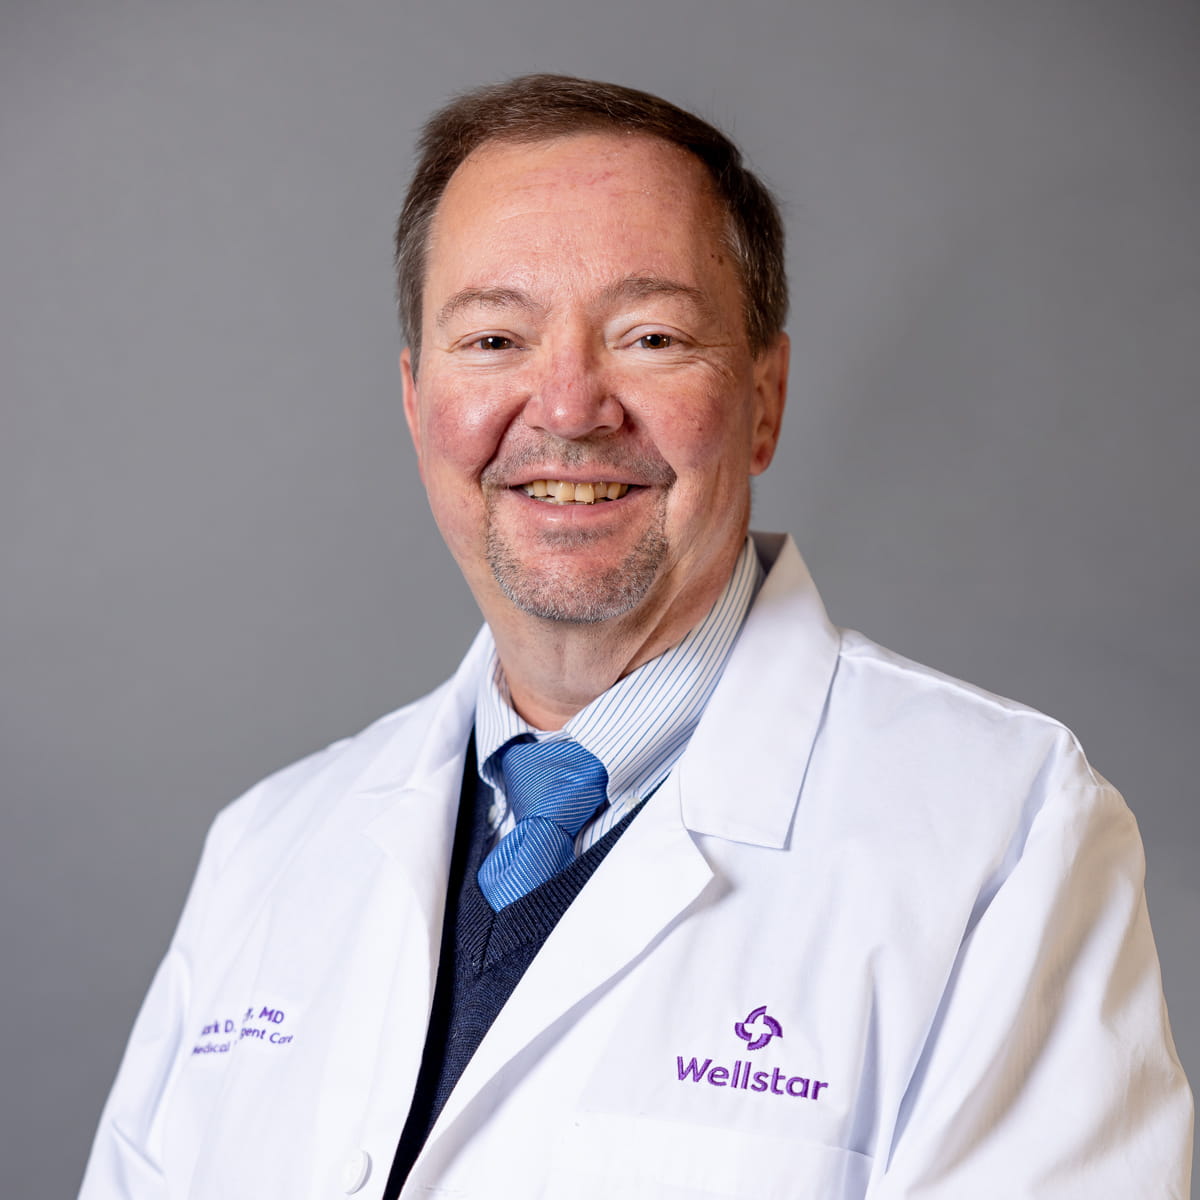 A friendly image of Mark Salsberry, MD